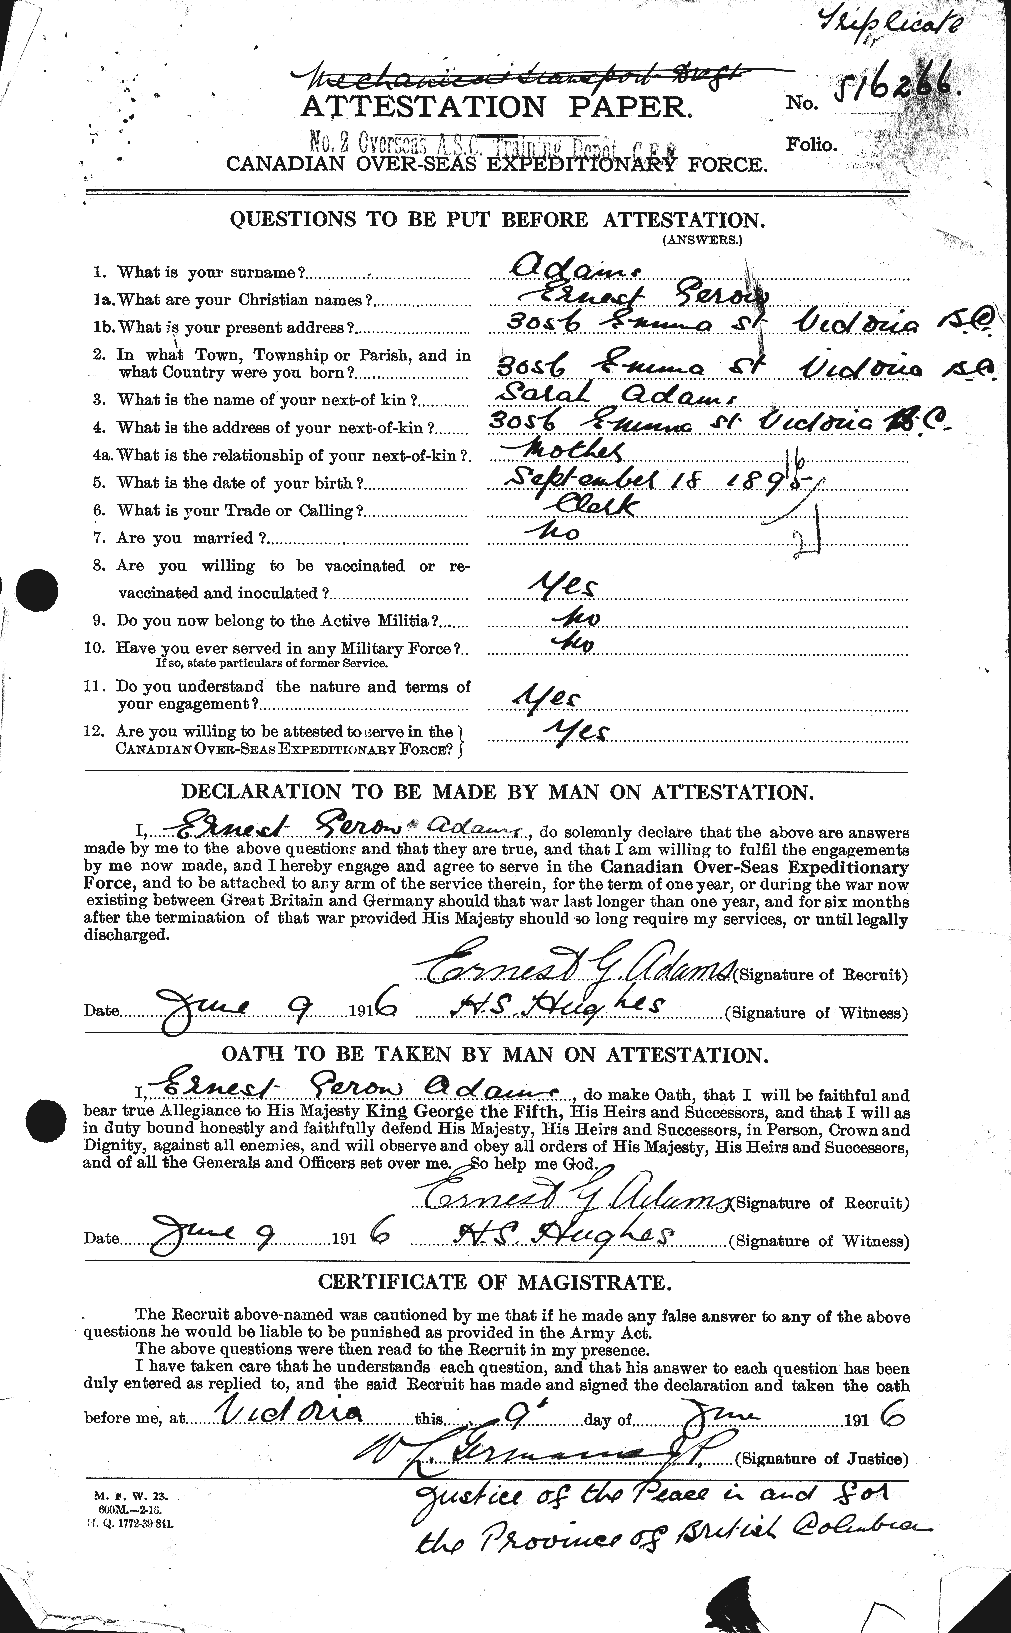 Personnel Records of the First World War - CEF 202589a